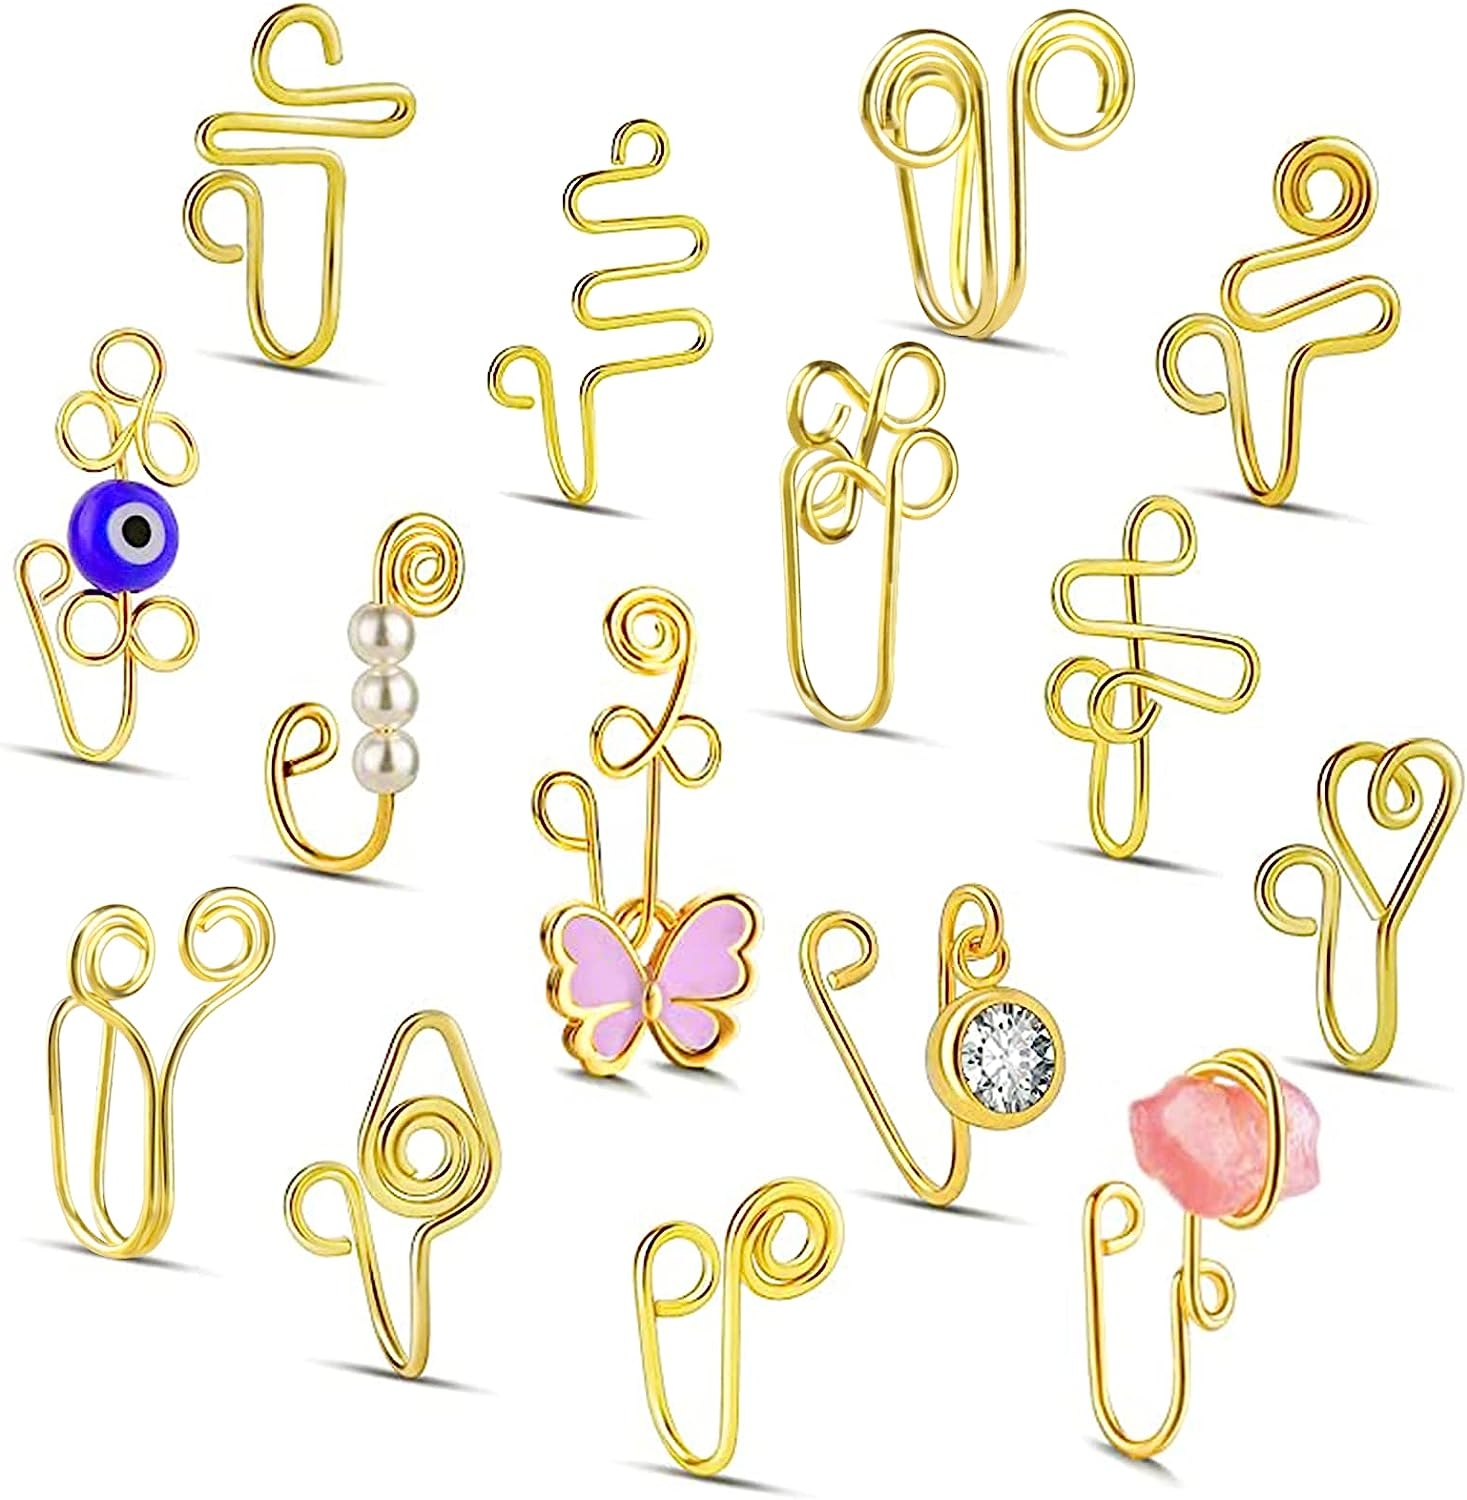 Mity rain Nose Cuffs, 18k Gold Plating African Nose Cuff Non Piercing, Clip On Fake Nose Cuff for Women(15pcs)   price checker